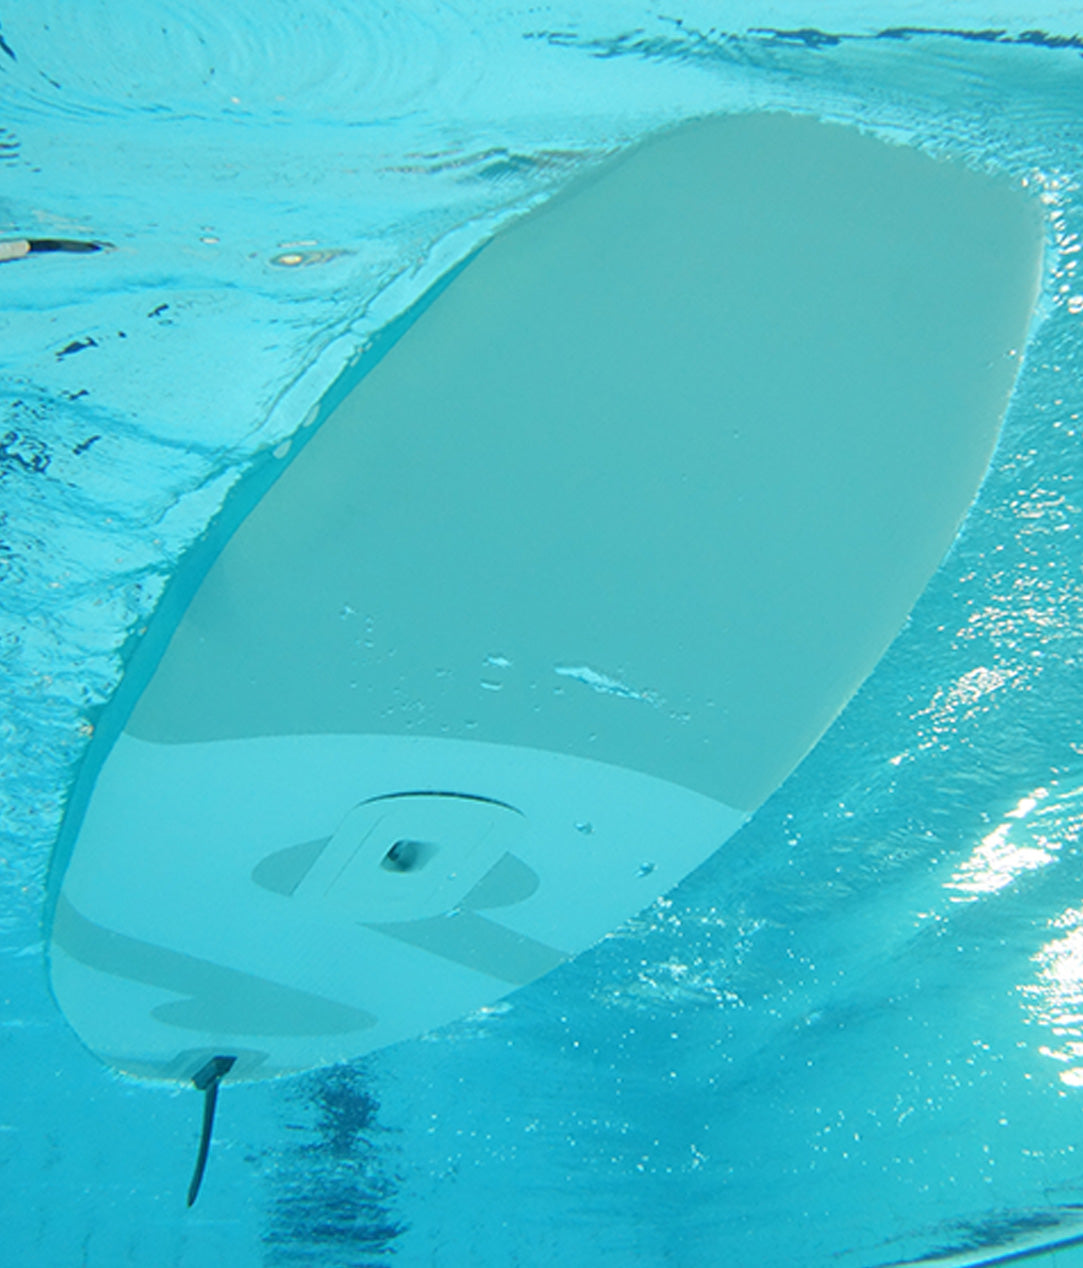 Sipaboards All Rounder Drive Self-Inflating SUP 11'